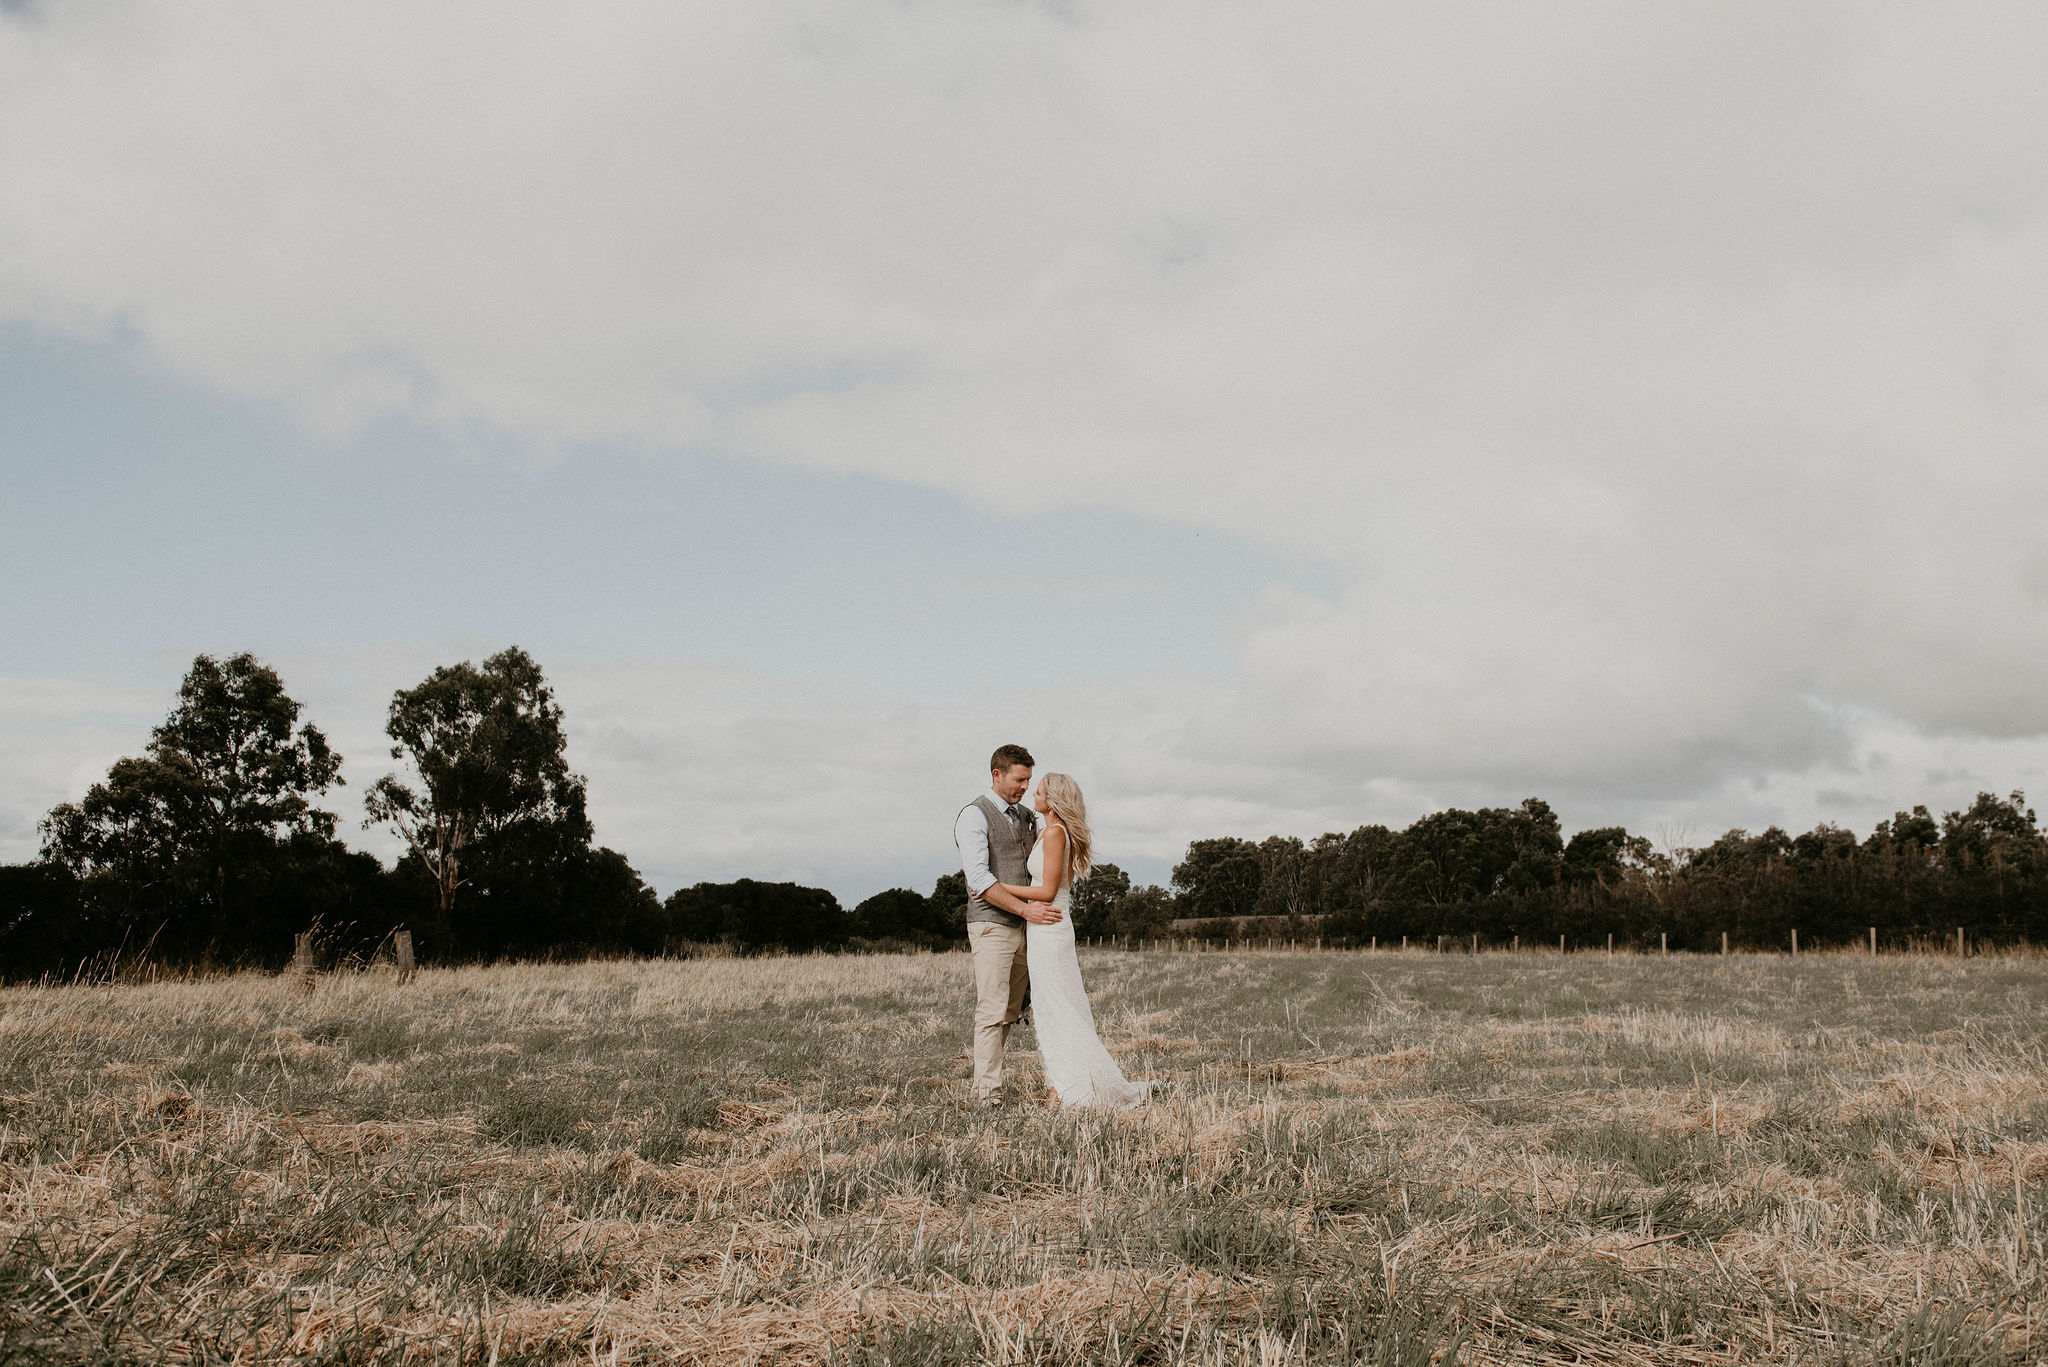 Lets-Elope-Melbourne-Celebrant-Photographer-Elopement-Package-Victoria-Sarah-Matler-Photography-Elop-at-Home-Farm-weddings-intimate-14